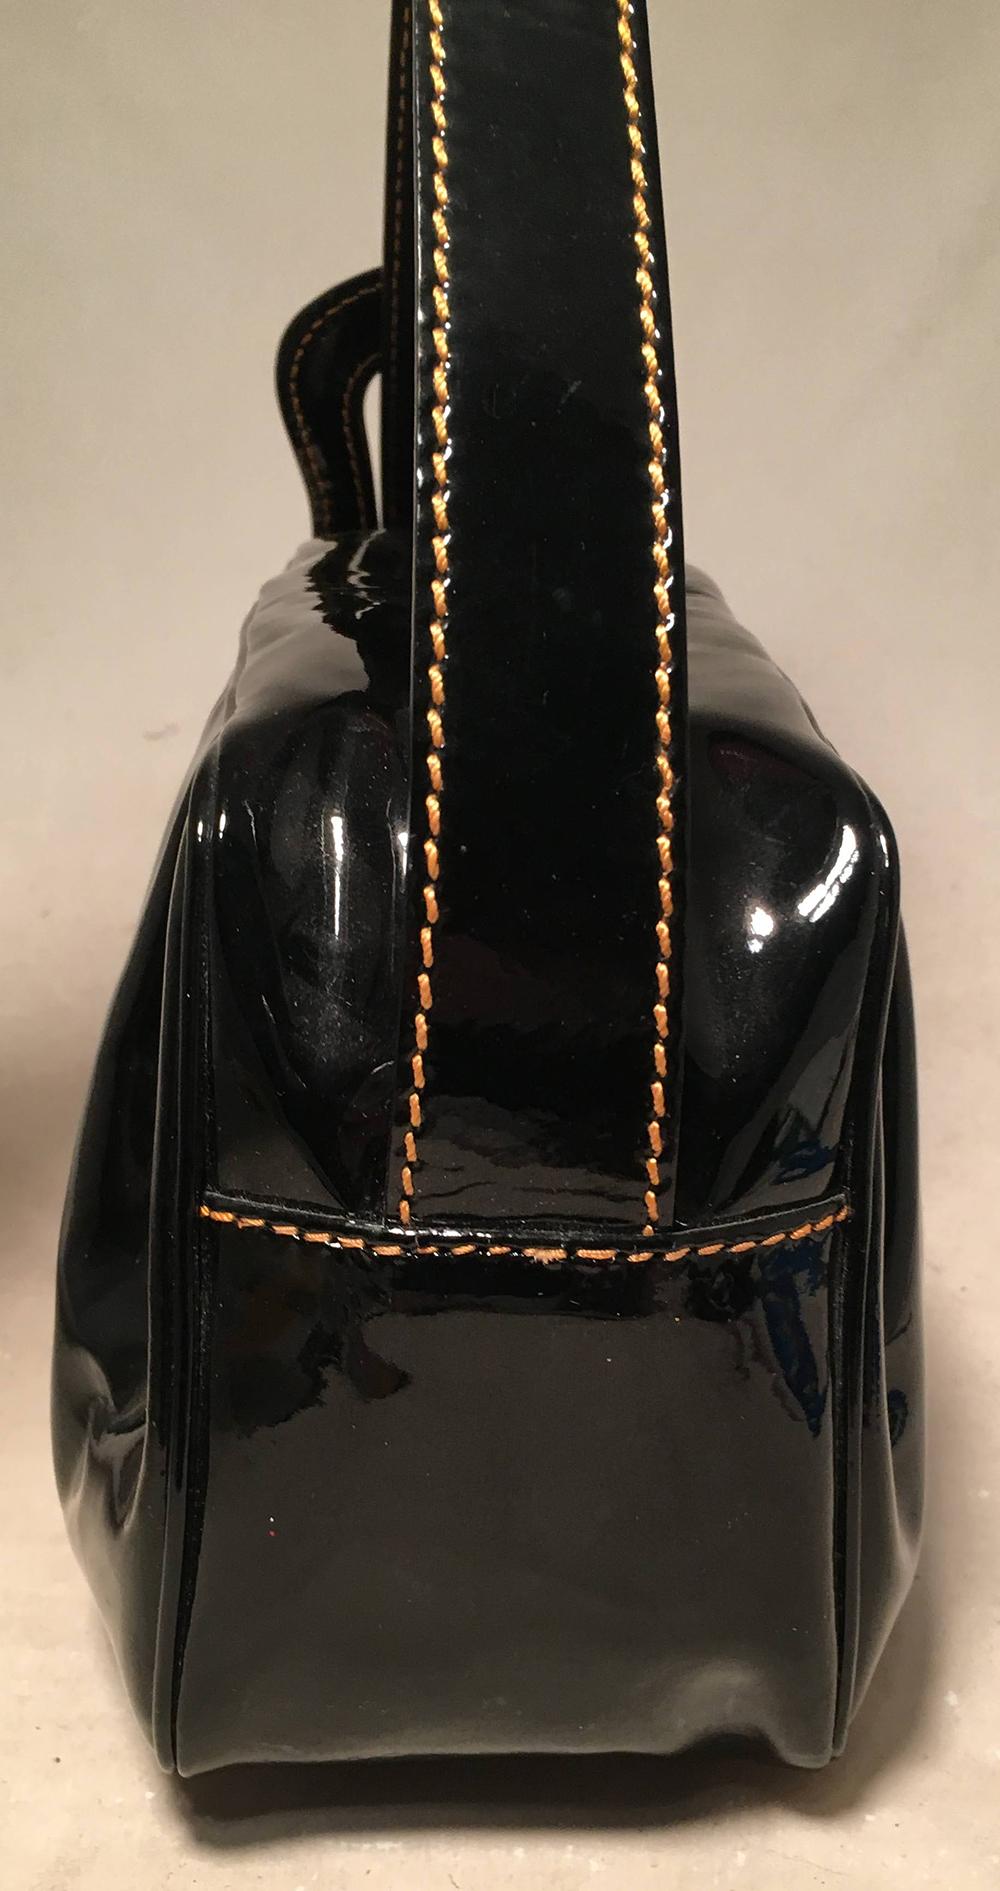 Fendi Borsa Mini B Black Patent Leather Handbag in excellent condition. Black patent leather exterior trimmed with orange topstitching and adjustable buckle shoulder strap. Top zipper closure opens to a black canvas interior that holds one side slit